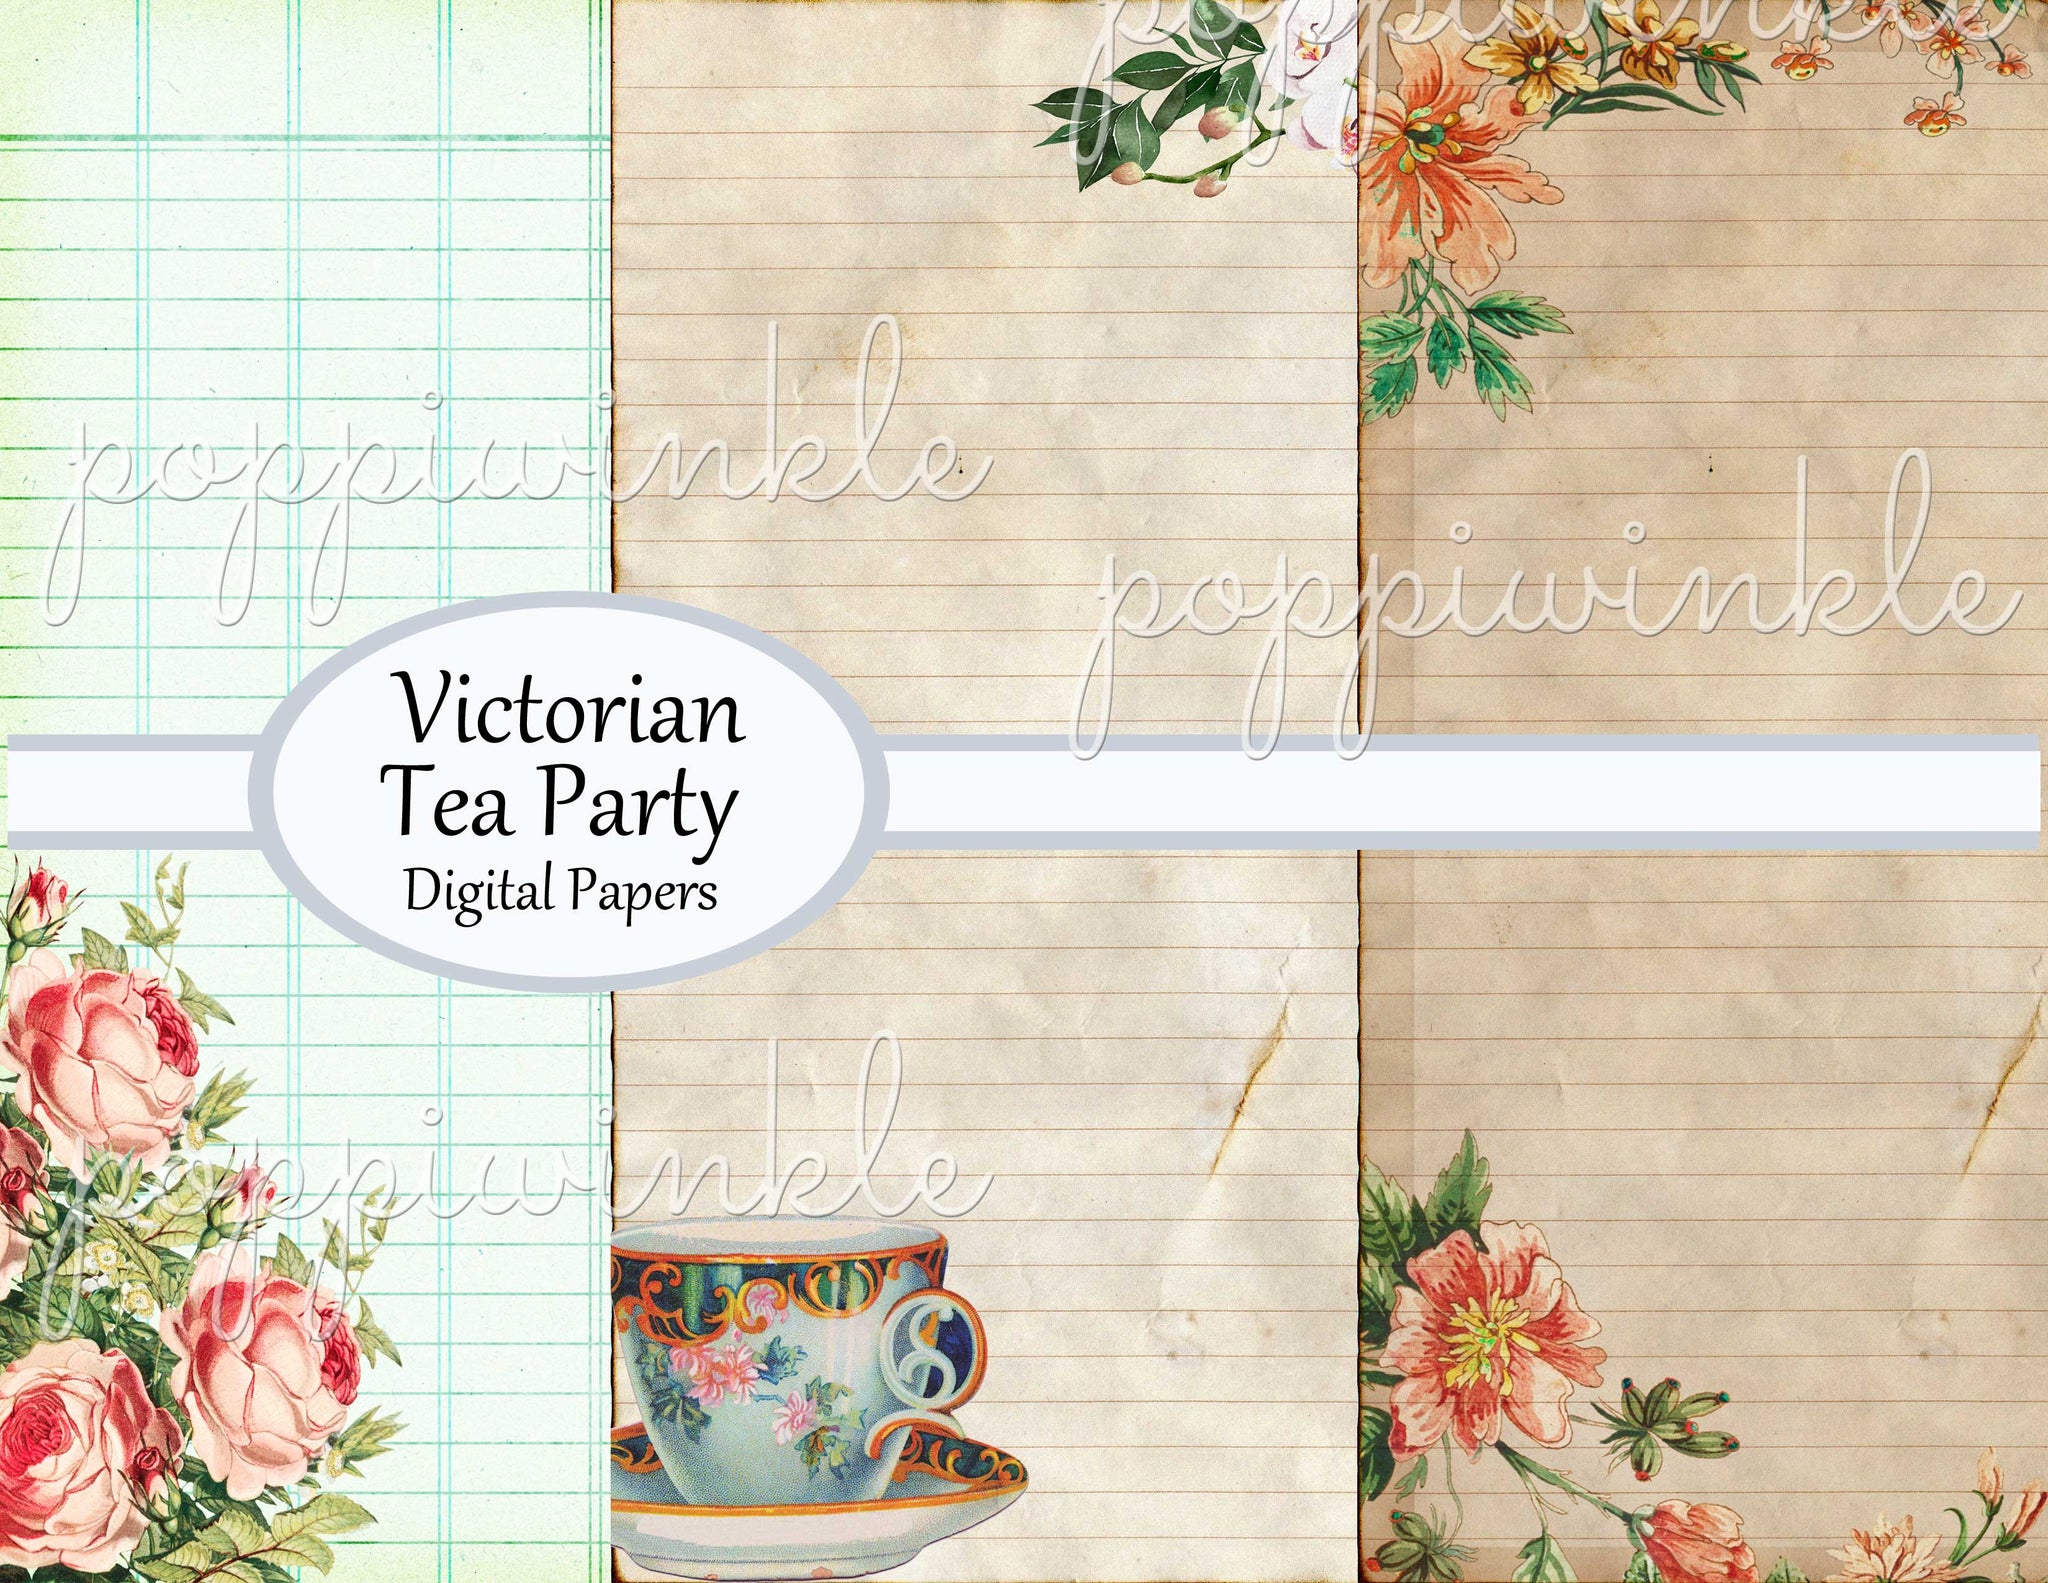 Digital Papers - Tea Party